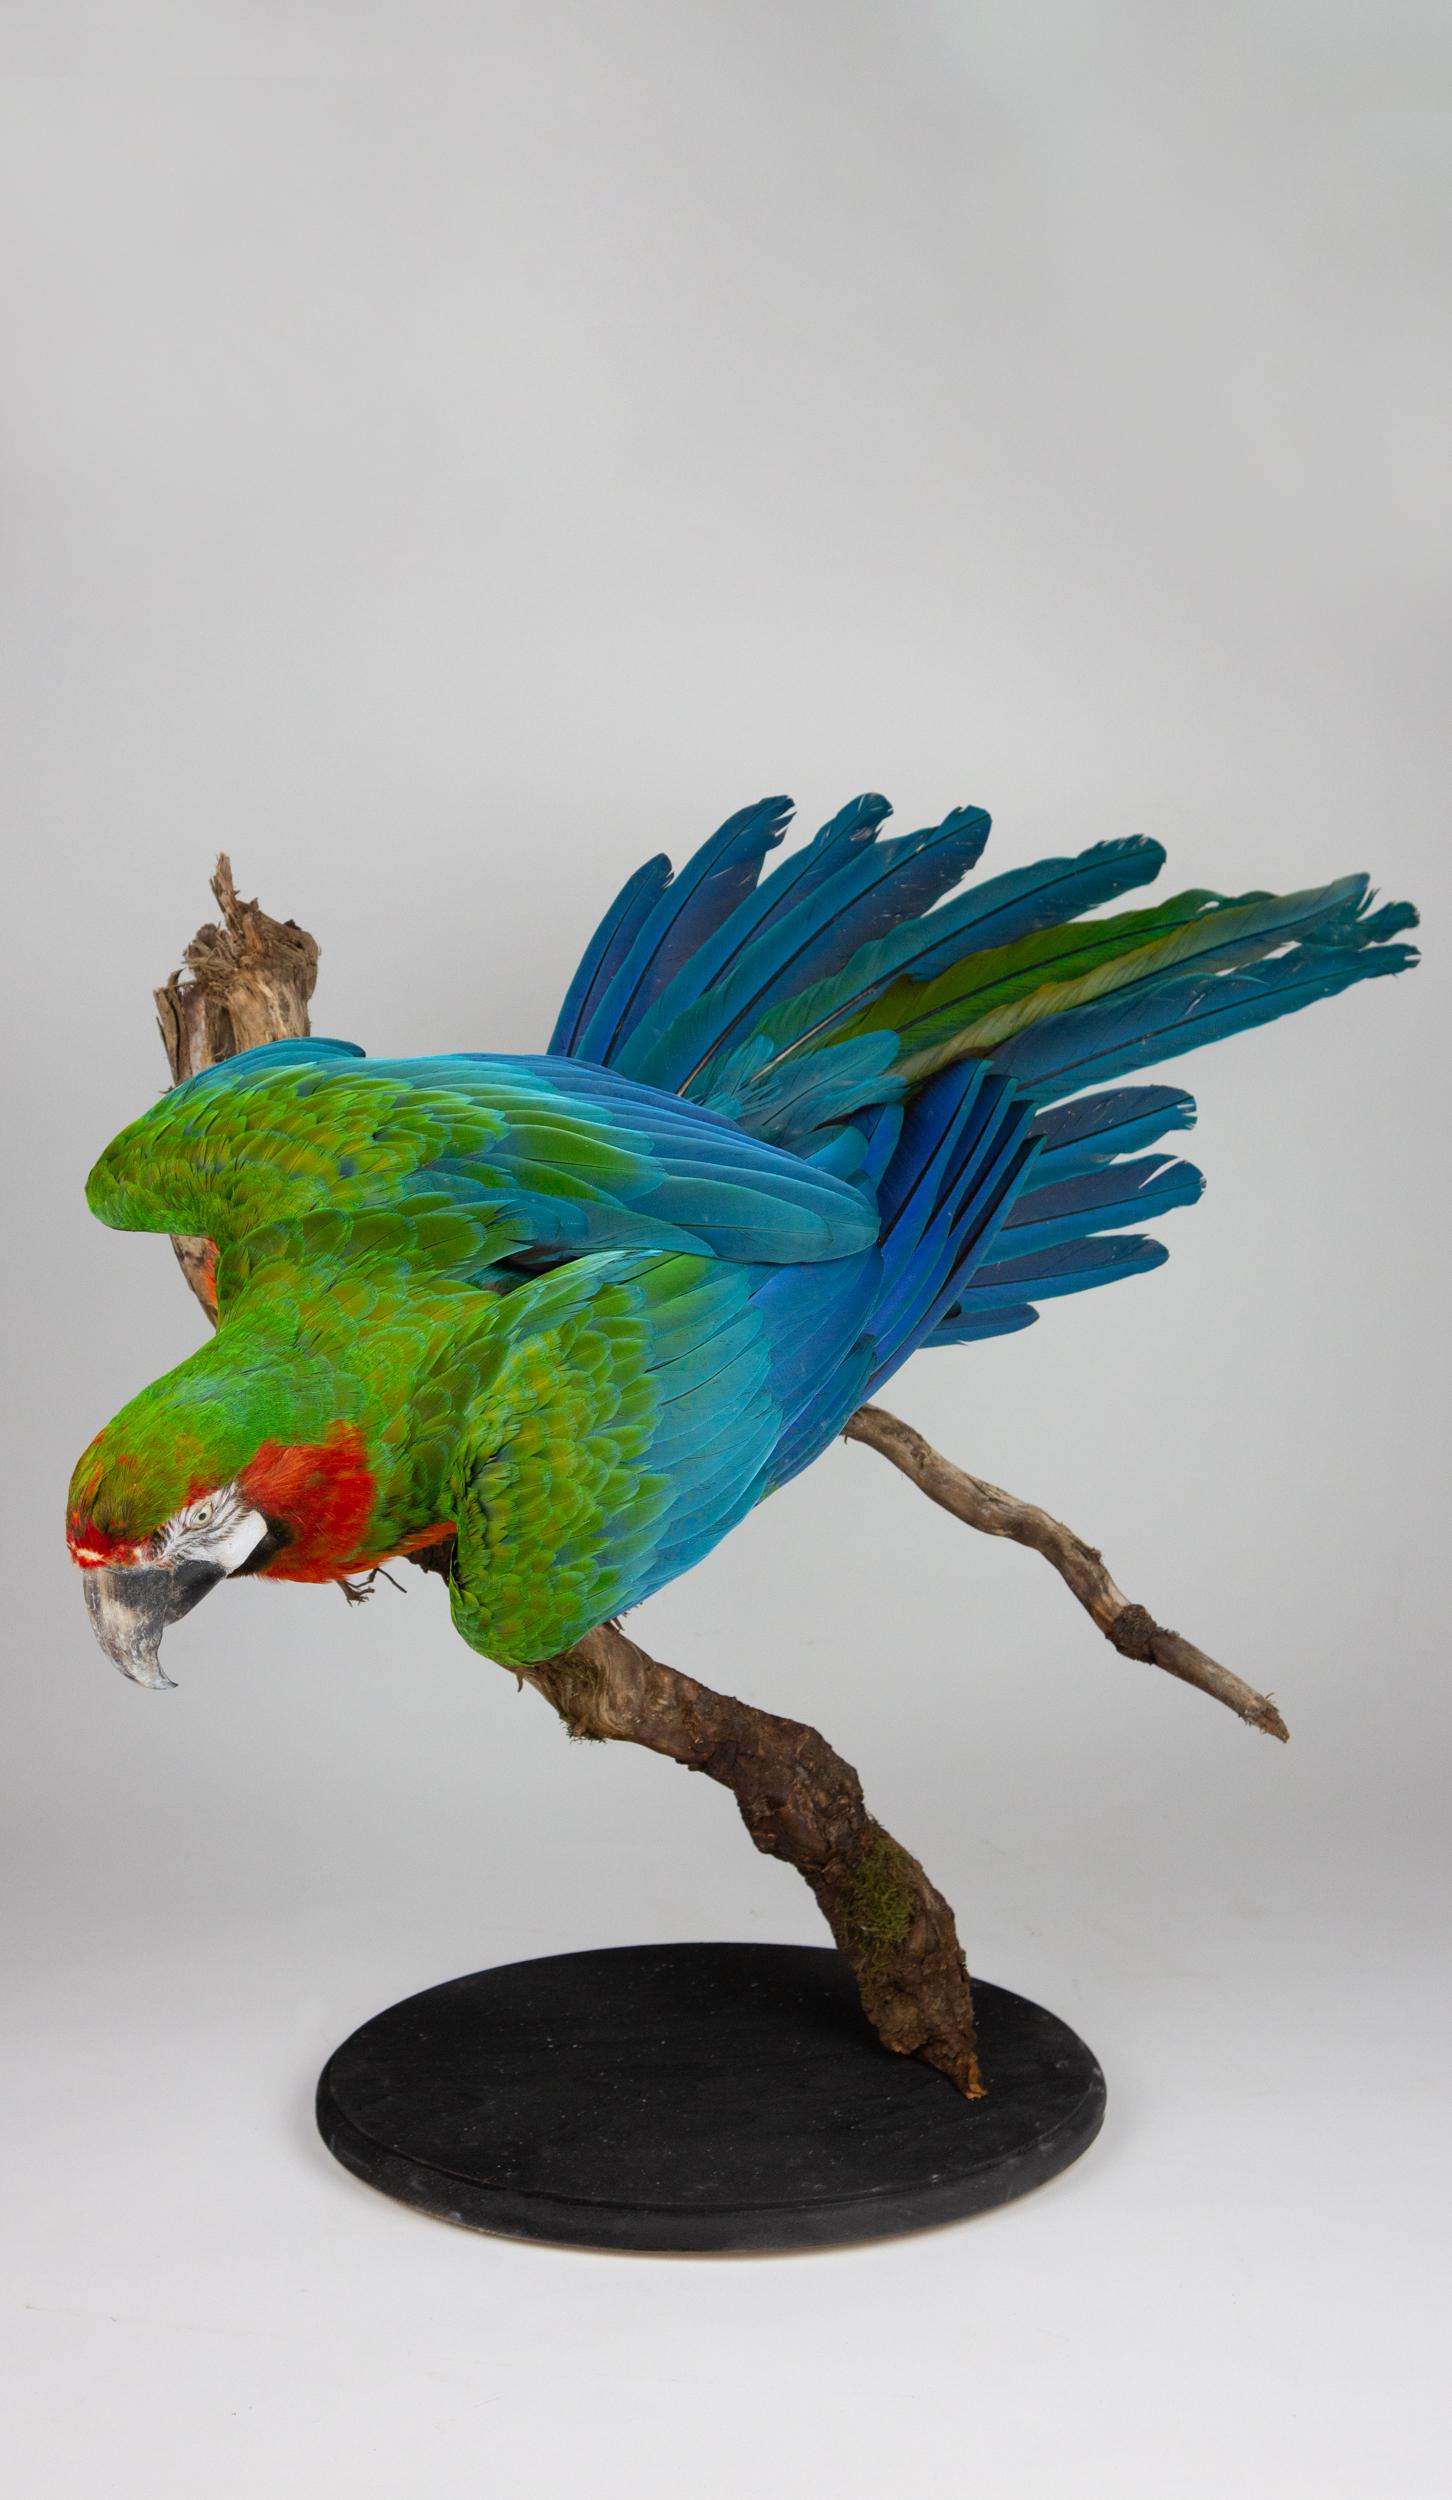 Taxidermied Catalina Macaw beautifully mounted on a wooden branch and black painted base would make a great addition to any library or collection. The Catalina Macaw is a vibrant cross between the blue-and-gold macaw and the scarlet macaw.